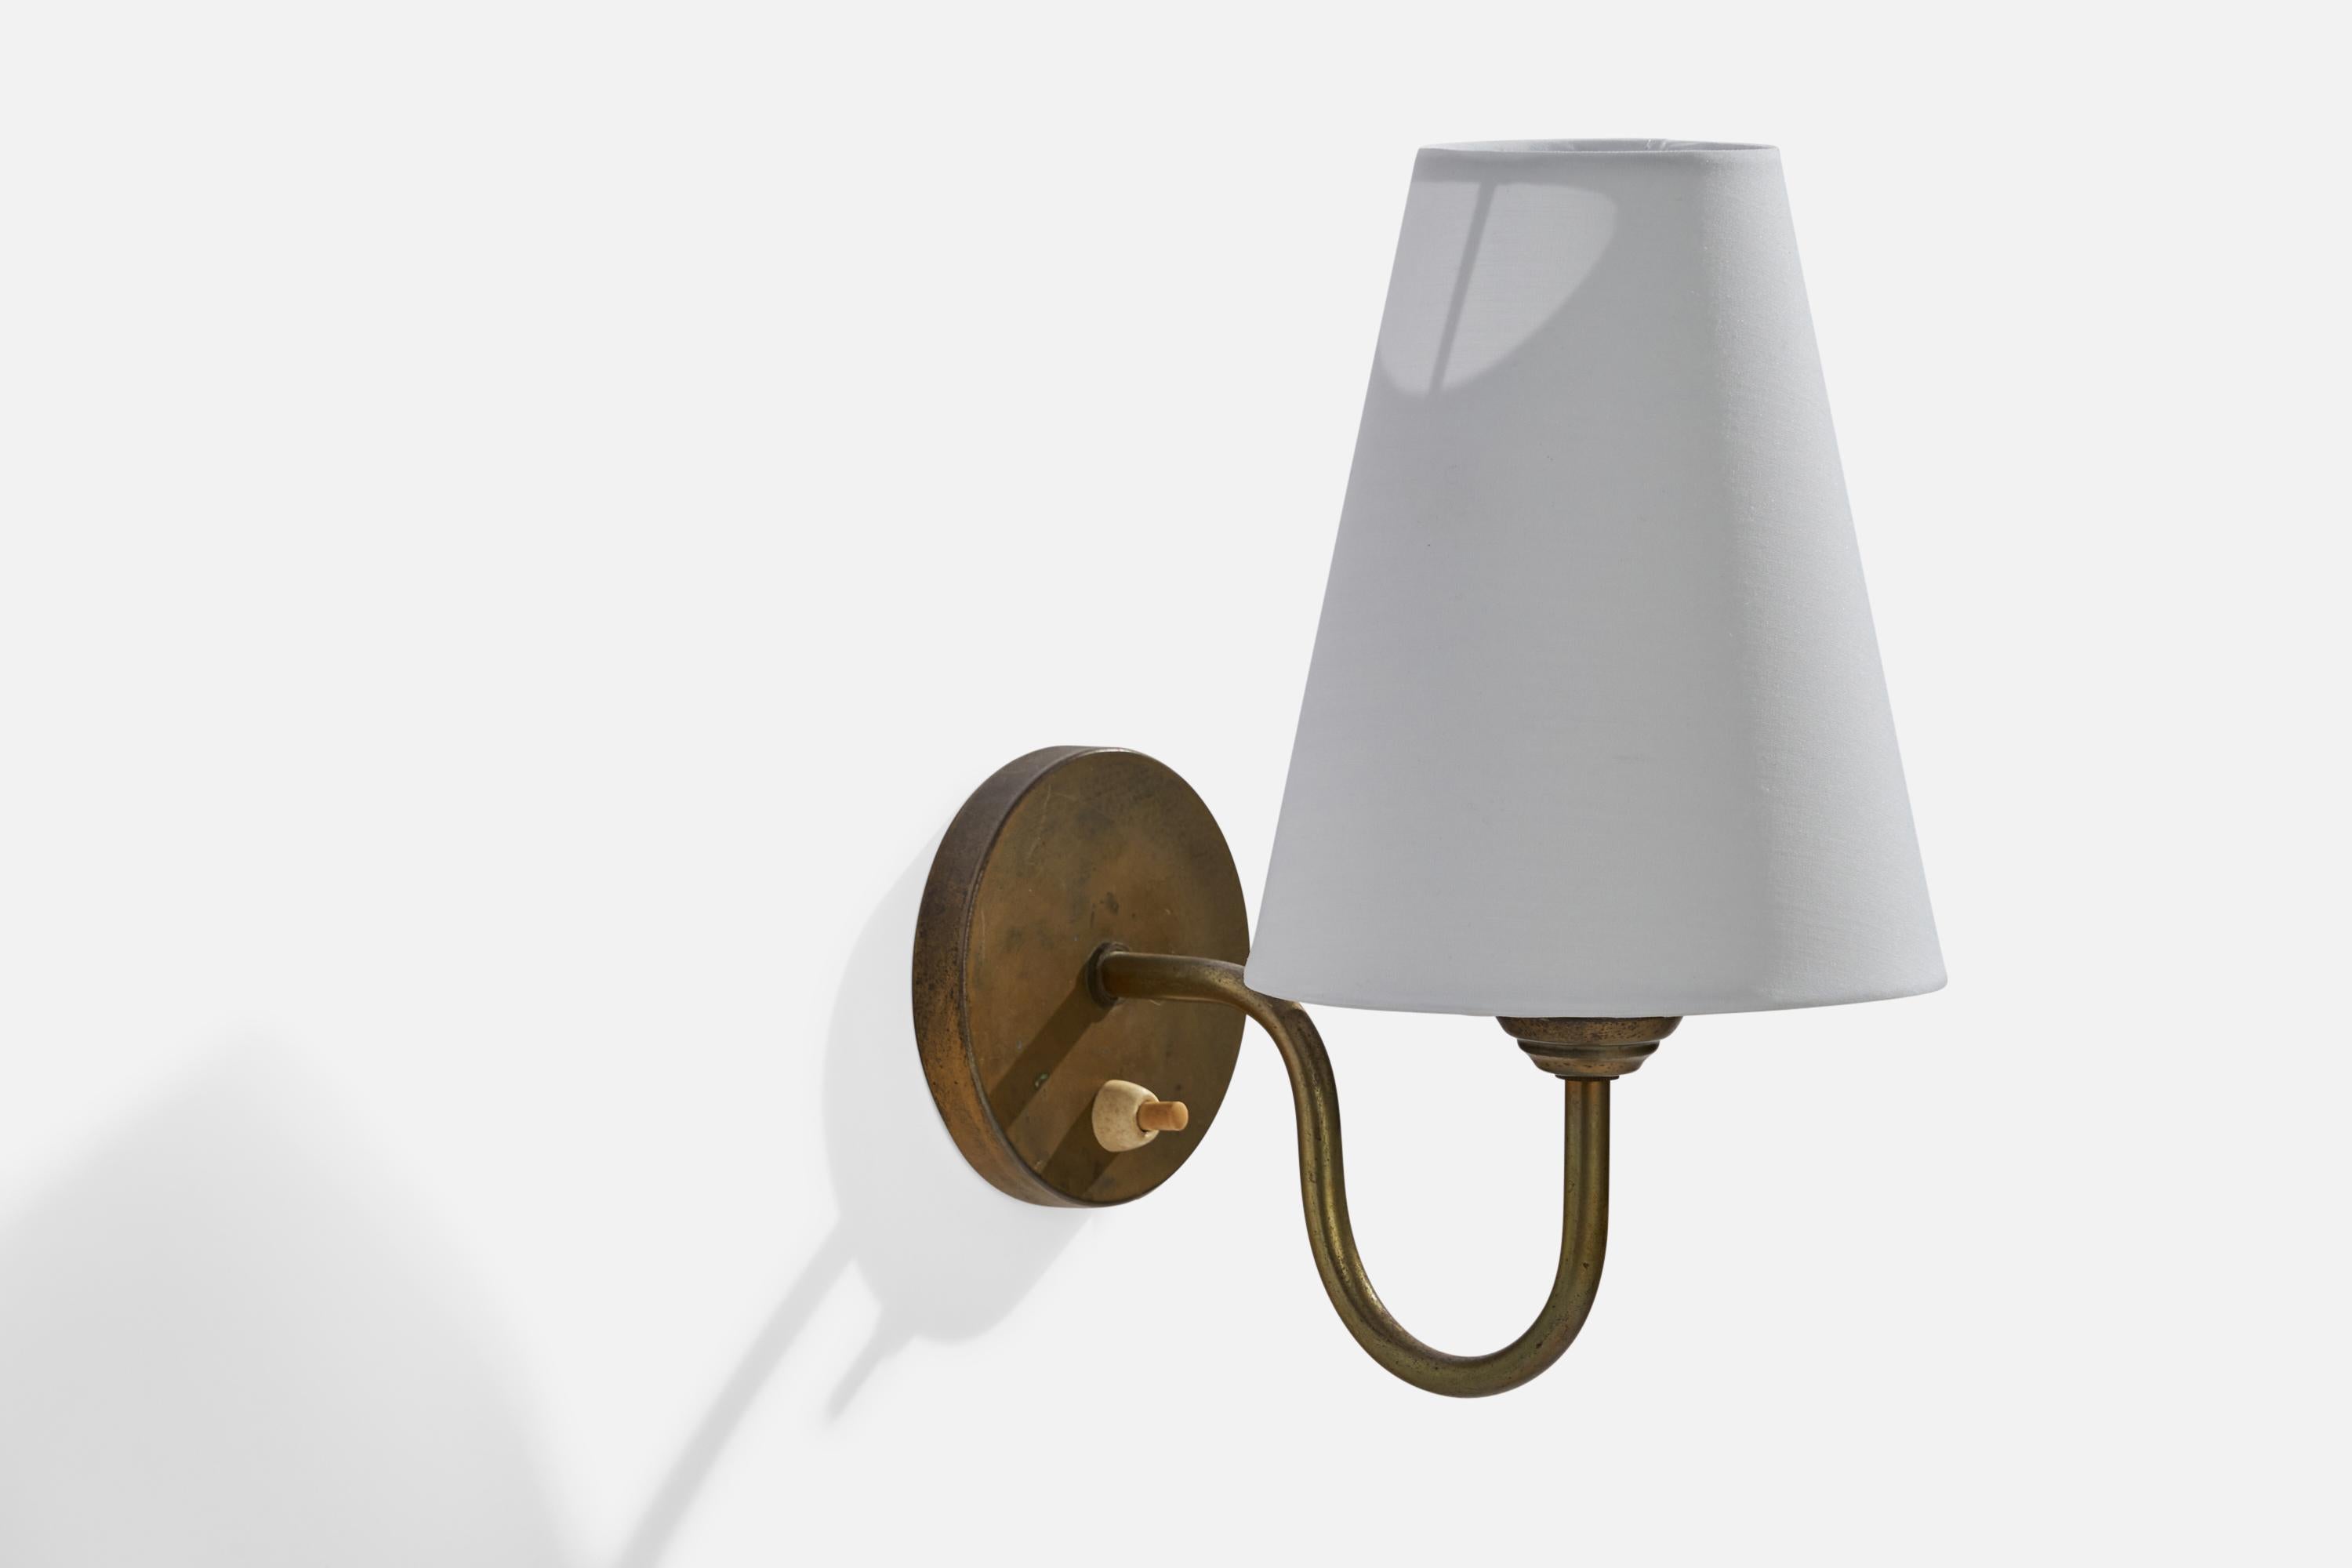 A brass and white fabric wall light designed and produced in Sweden, 1940s.

Overall Dimensions (inches): 10.5” H x 5.5” W x 8.25” D
Back Plate Dimensions (inches): 3.75”  H x 3.75” W x .50”  D
Bulb Specifications: E-26 Bulb
Number of Sockets: 1
All